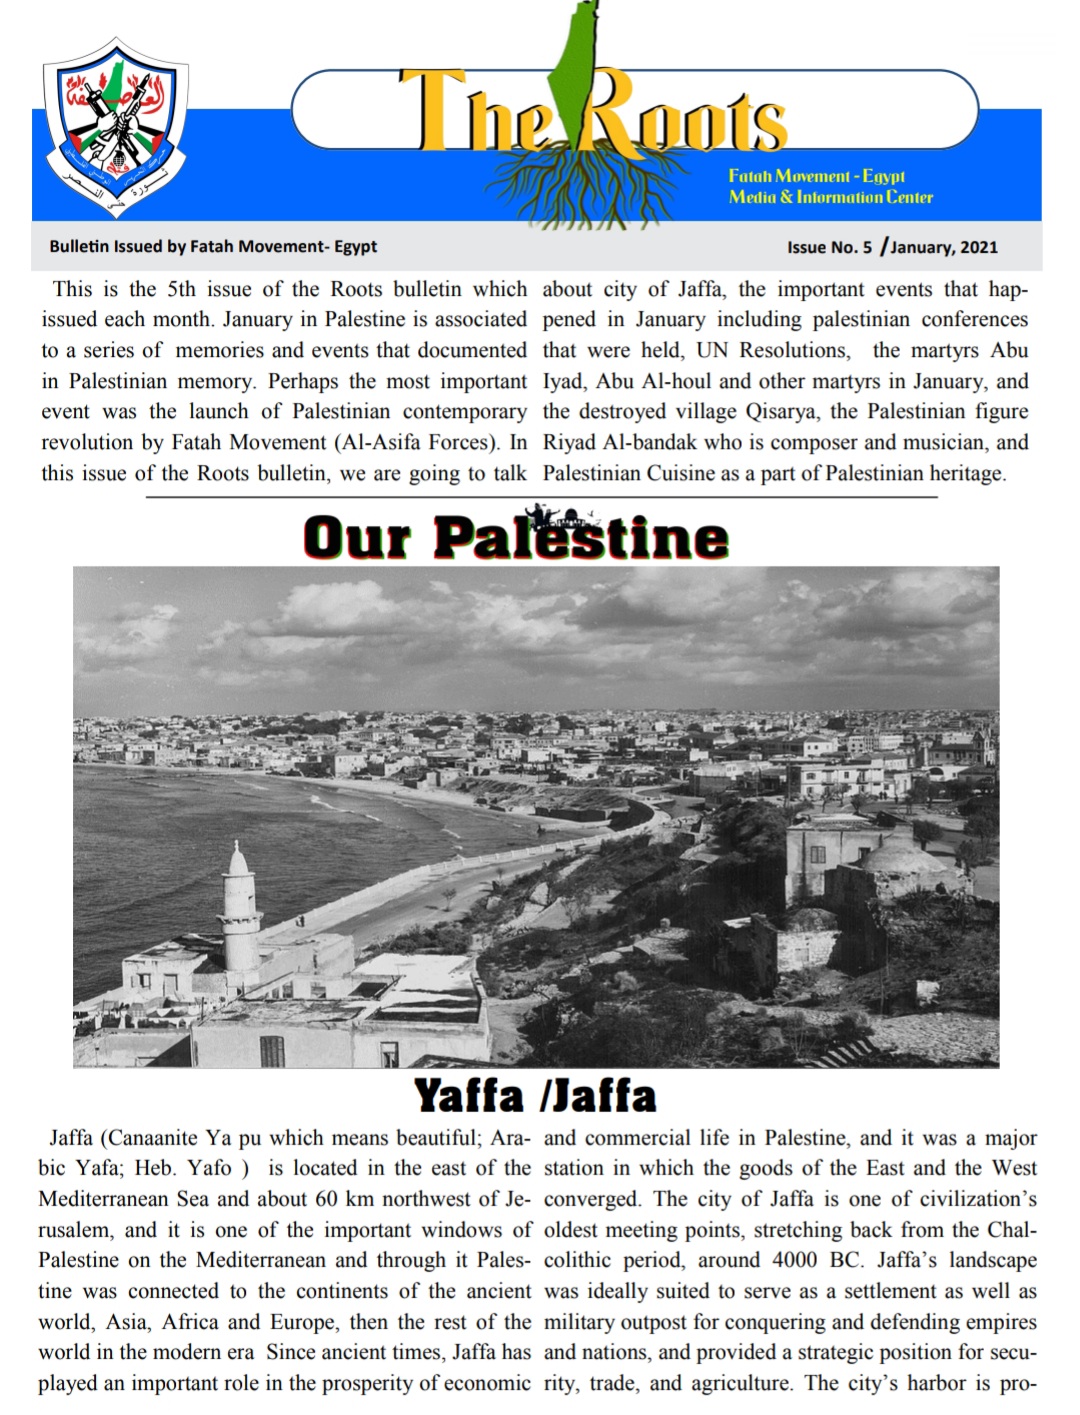 The Roots Bulletin (Issue No.5)